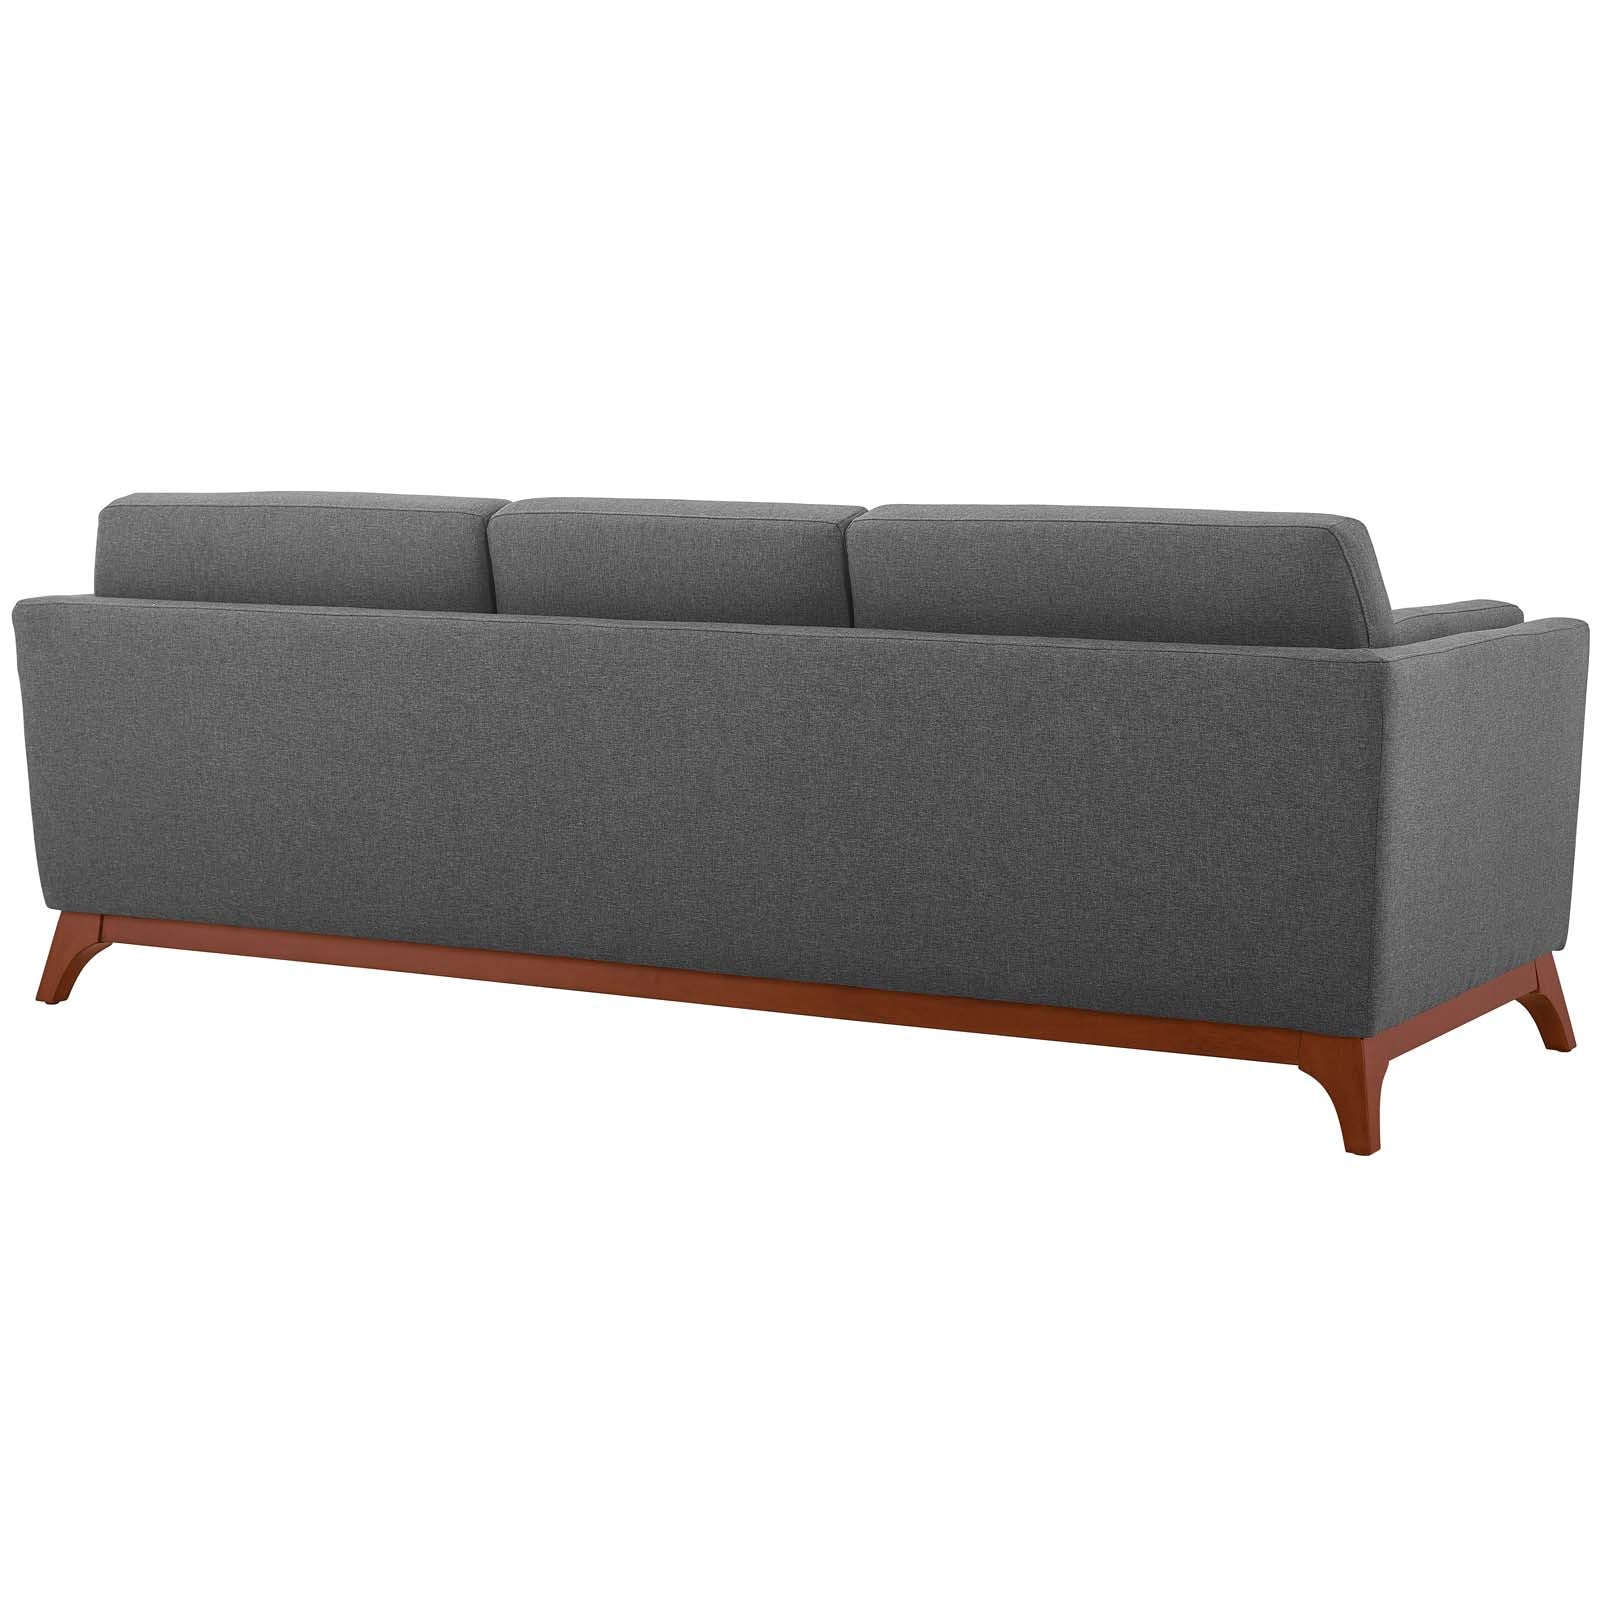 Modway Sofas & Couches - Chance Upholstered Fabric Sofa Gray